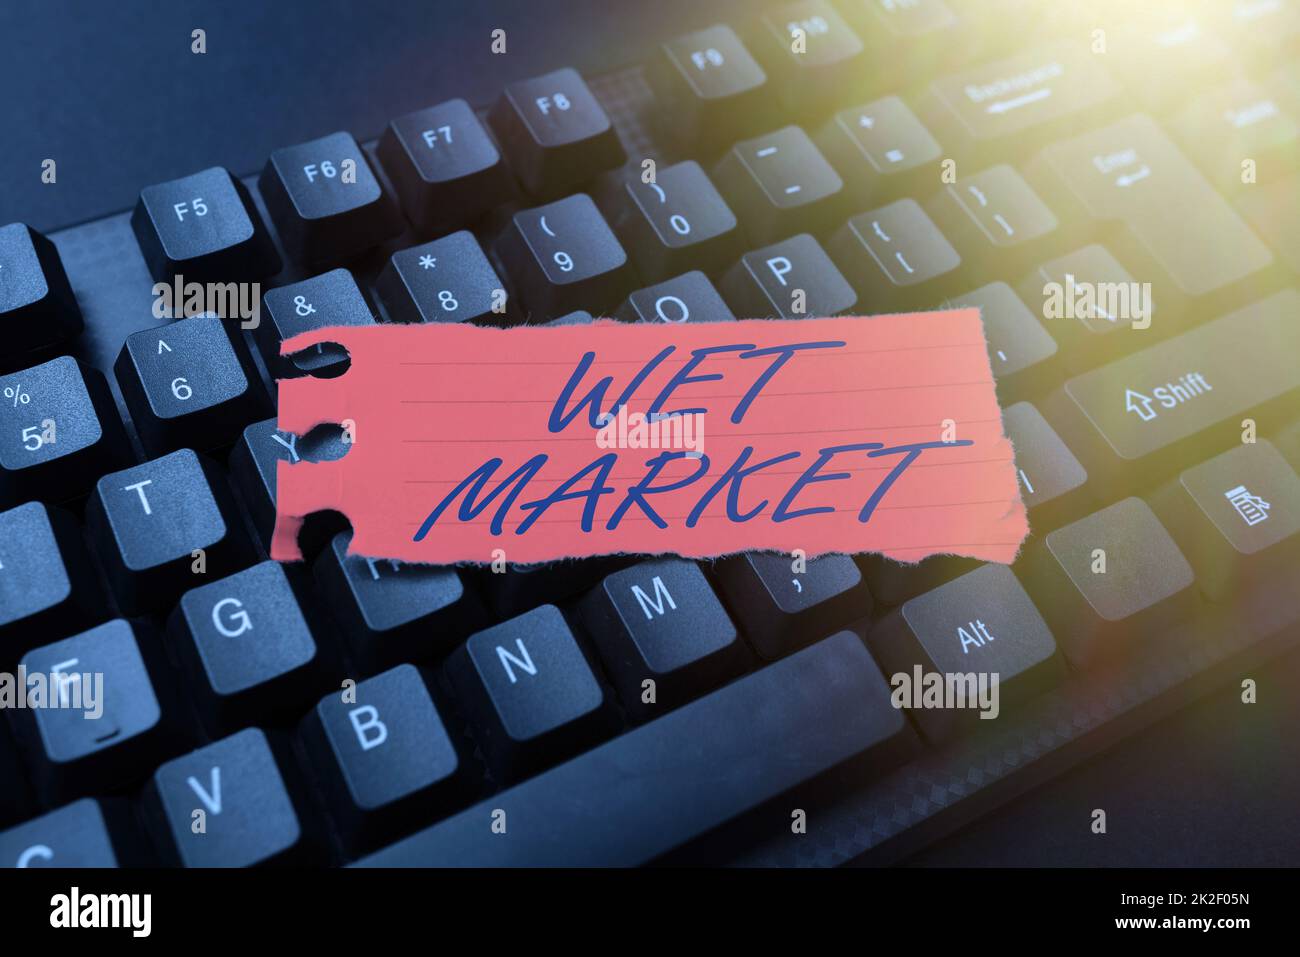 Sign displaying Wet Market. Business showcase Wet Market Typing Program Code Script, Abstract Downloading New Online Journal Stock Photo